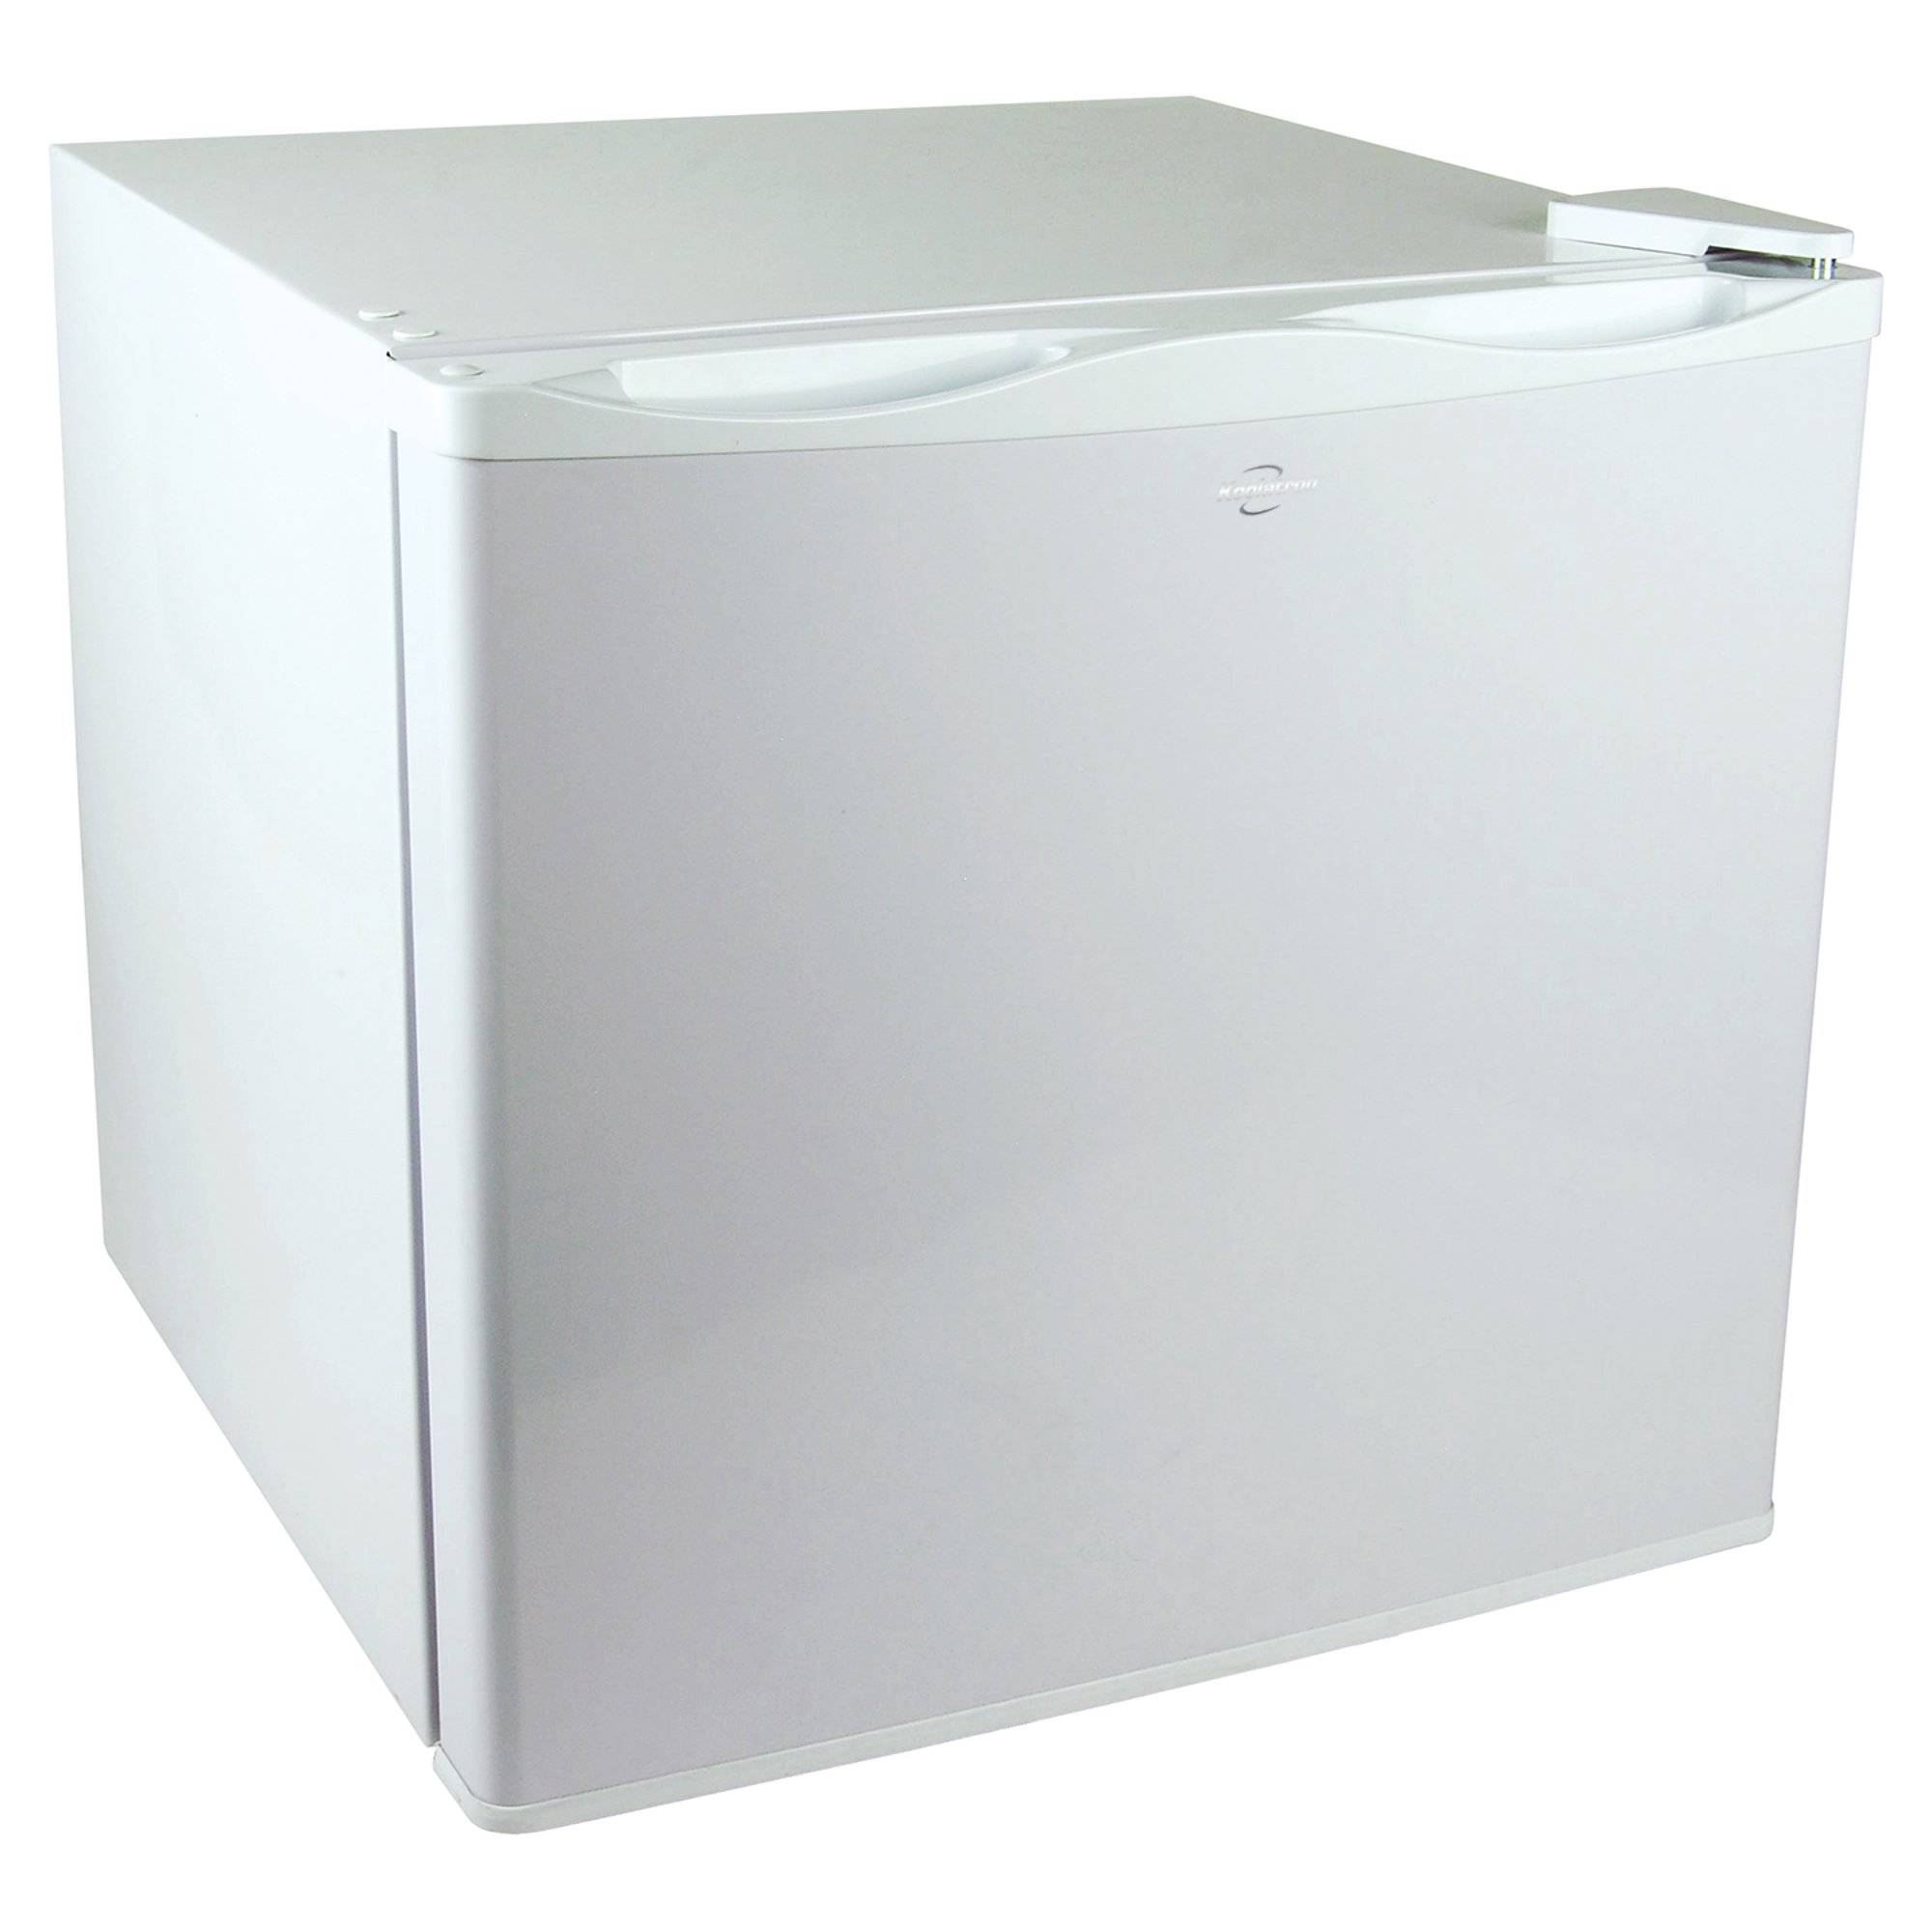 Igloo IUF3WH 3.0 Cu. Ft. Upright Freezer with 1 Pull Out Drawer